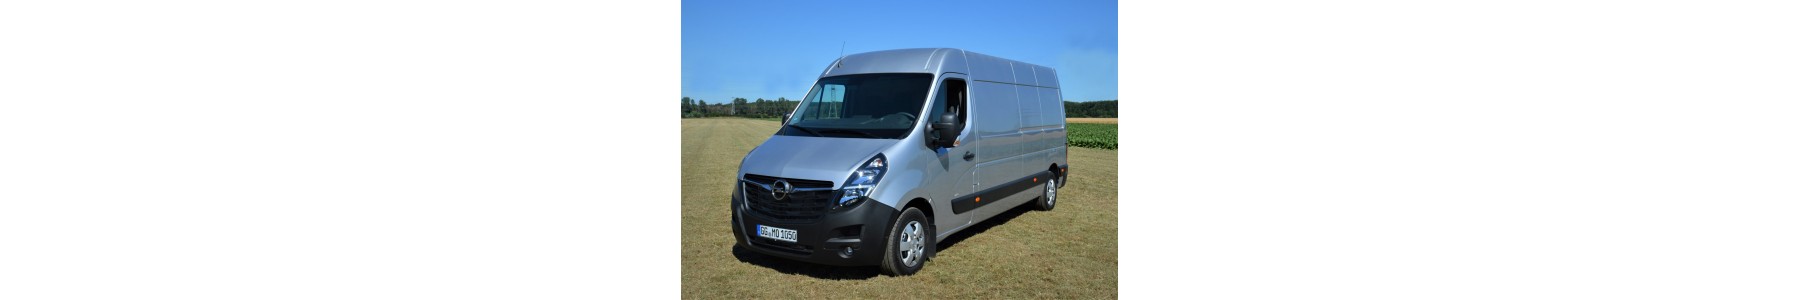 22H22 - Tuning / Personnalisation / Equipement pour OPEL MOVANO 2010 - 2021